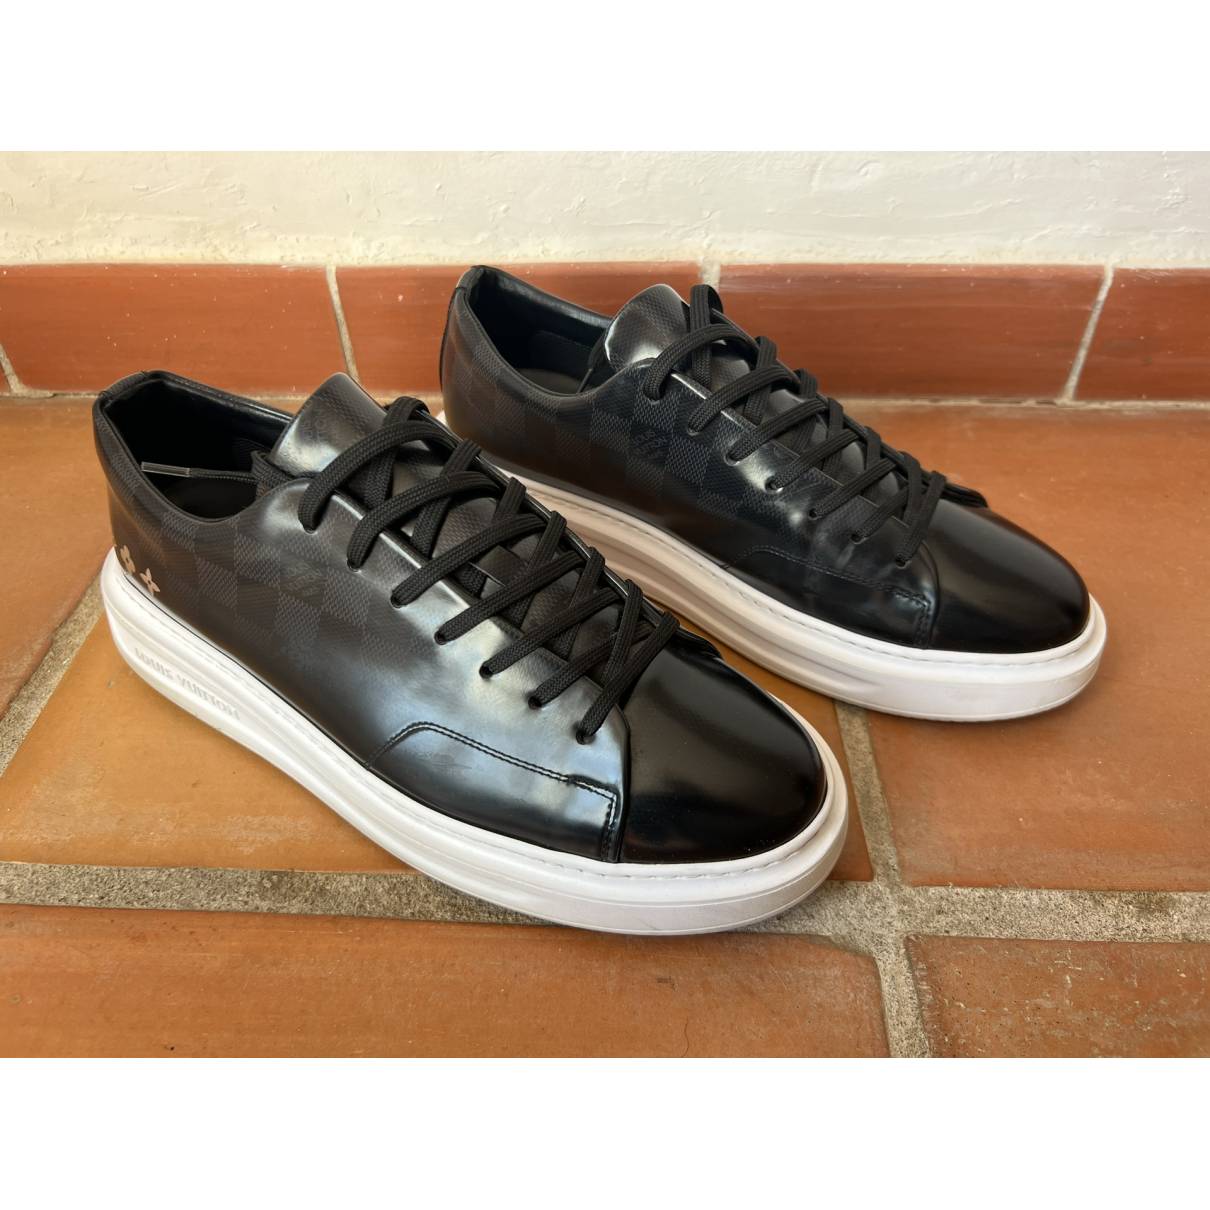 louis vuitton beverly hills sneakers